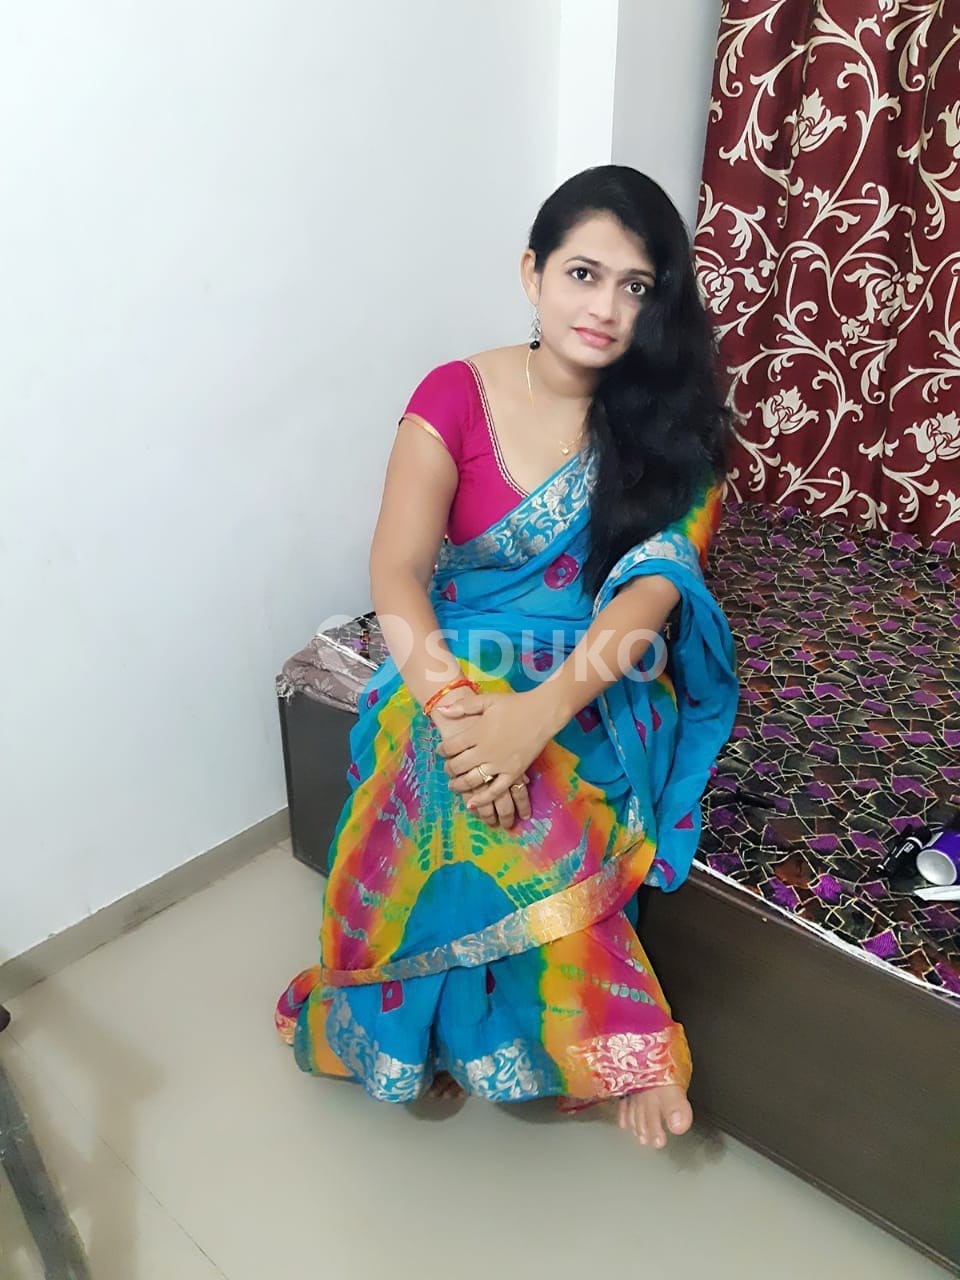 Bilaspur myself Mallika TODAY LOW PRICE 100% SAFE AND SECURE GENUINE CALL GIRL AFFORDABLE PRICE CALL NOW